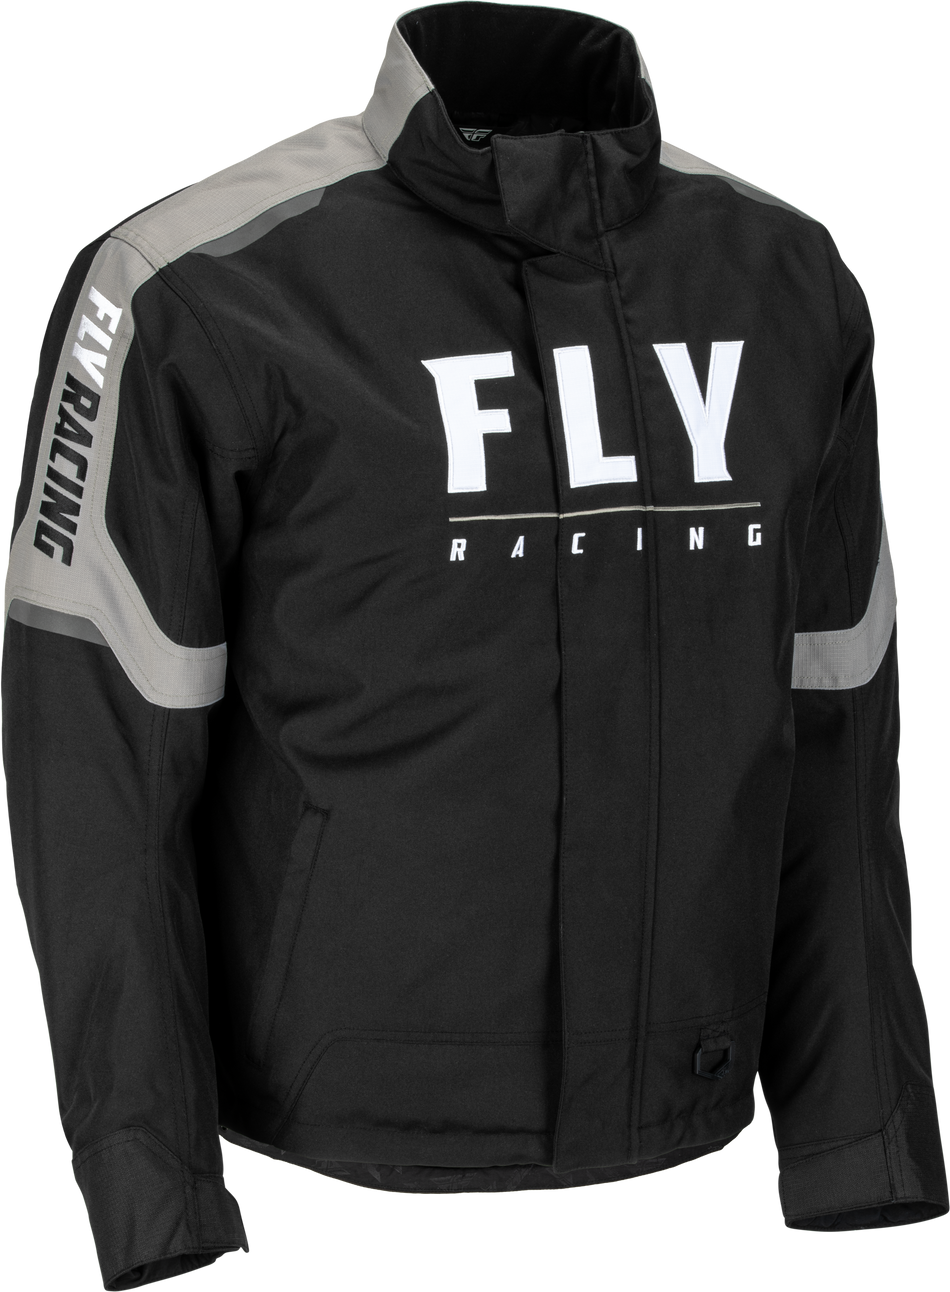 FLY RACING Outpost Jacket Black/Grey Sm 470-4143S